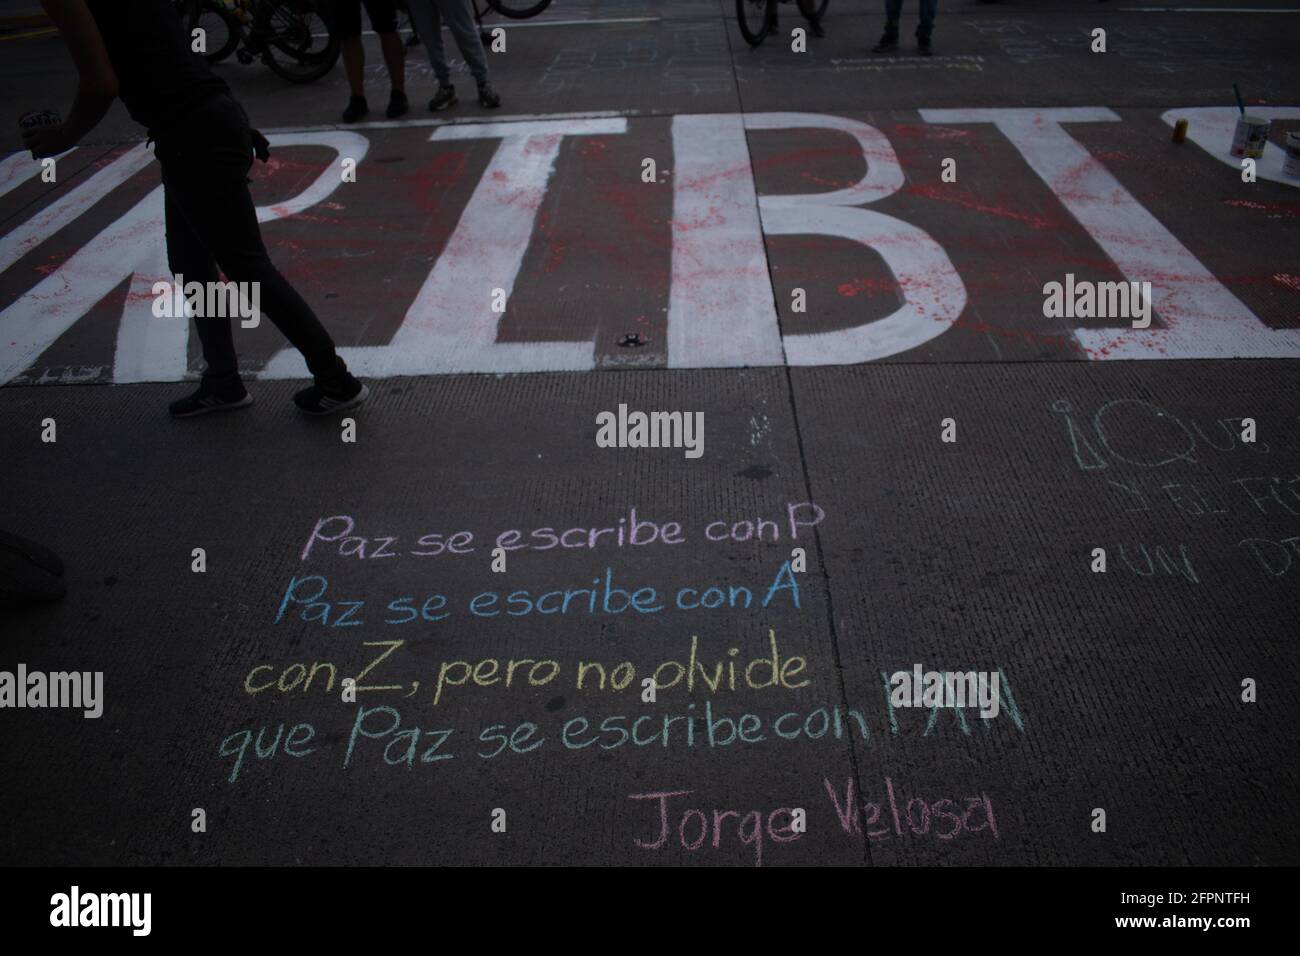 Bogota, Cundinamarca, Colombia. 19th May, 2021. Demonstrations increase in Bogota on May 20, 2021 in the context of a national strike in Colombia against the tax reform and the government of Ivan Duque. Credit: Daniel Romero/LongVisual/ZUMA Wire/Alamy Live News Stock Photo